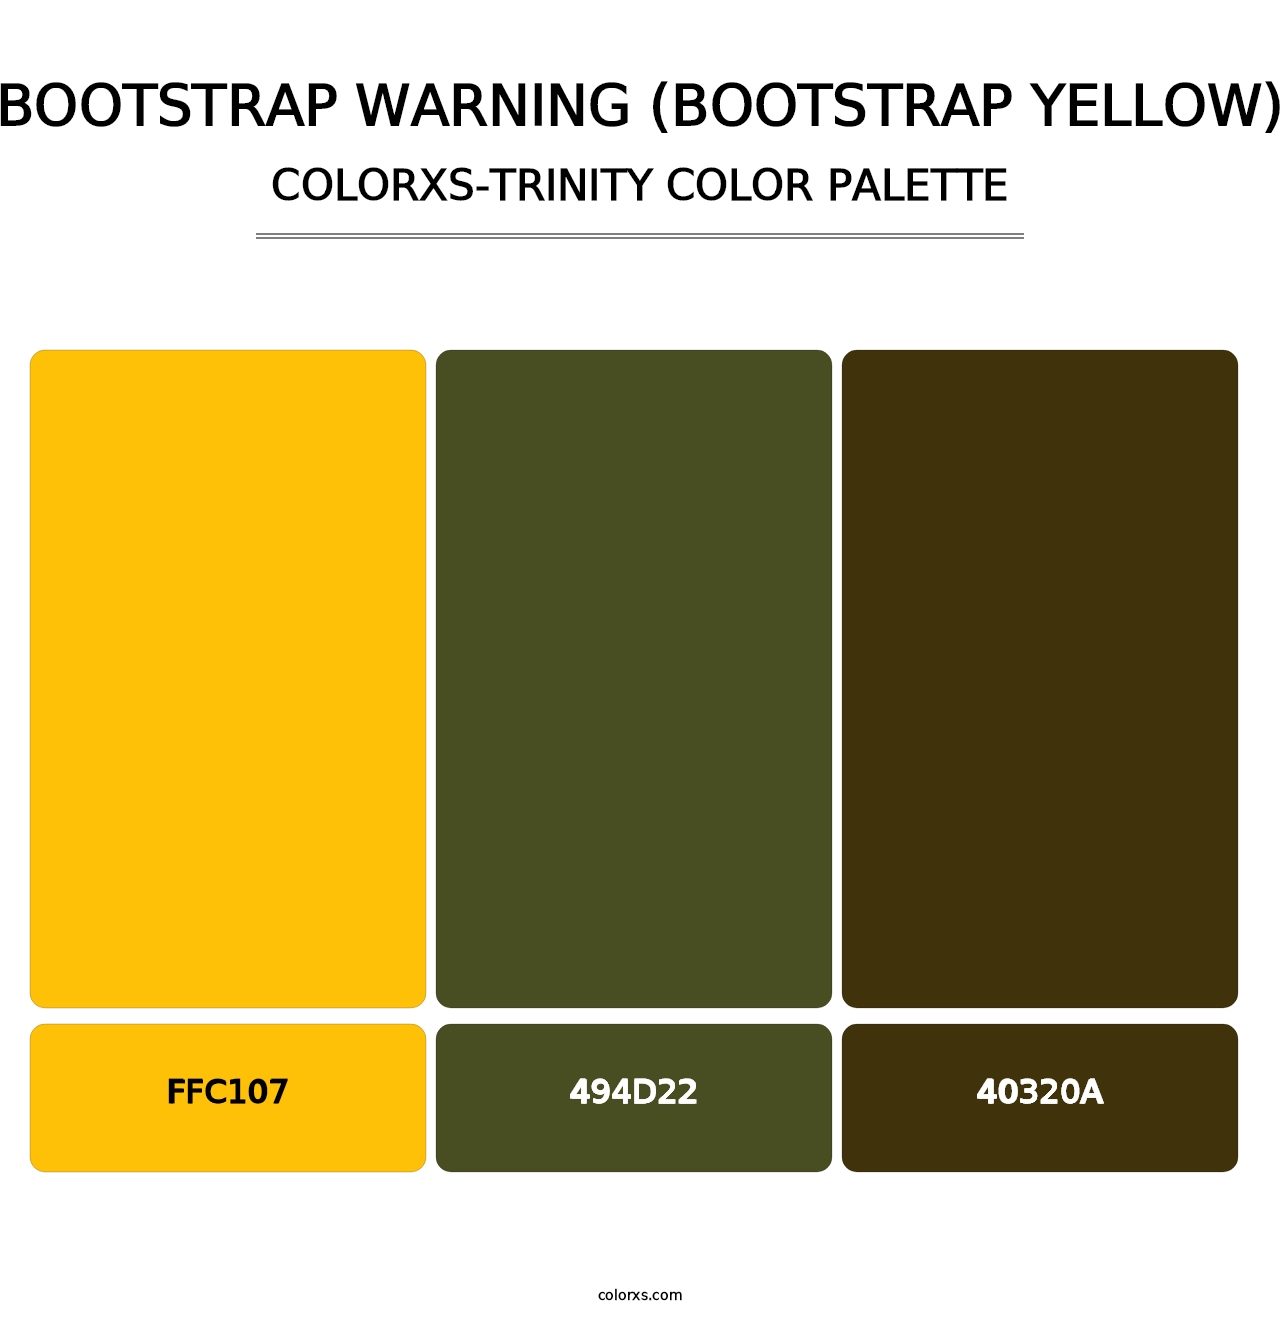 Bootstrap Warning (Bootstrap Yellow) - Colorxs Trinity Palette